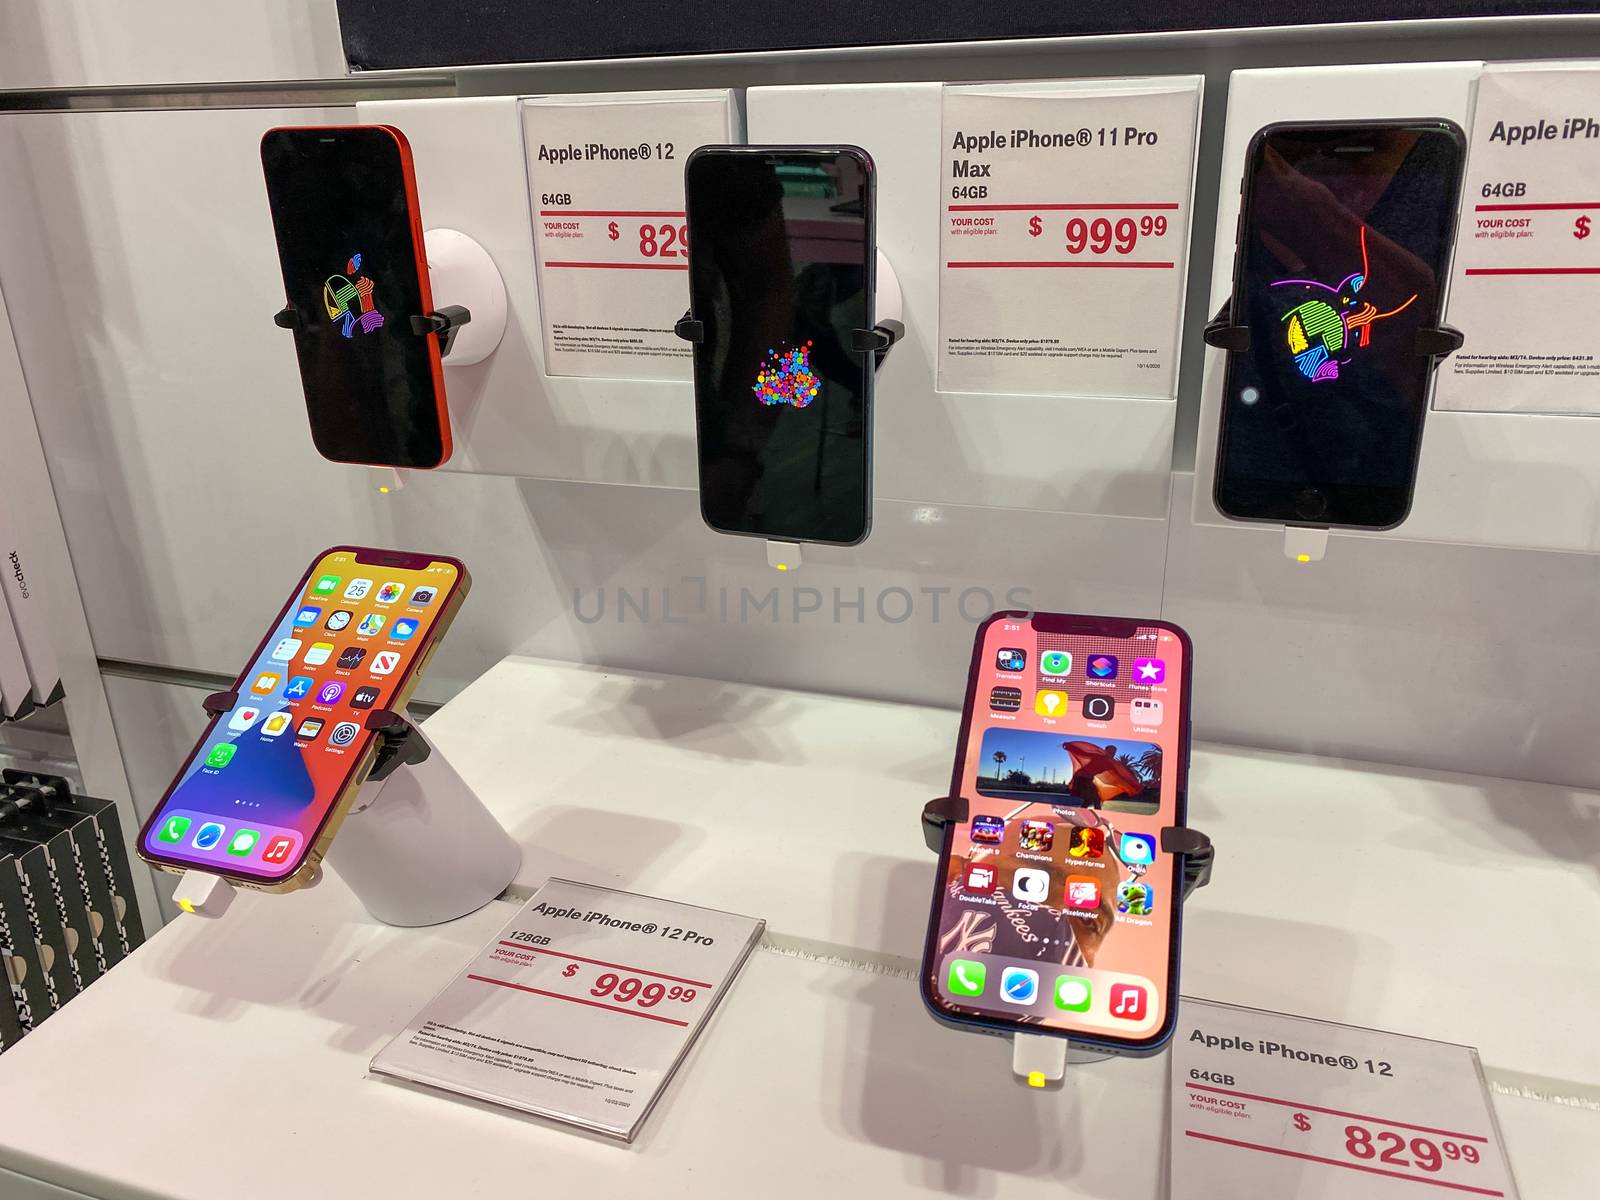 Orlando, FL/USA - 10/25/20: The new Apple iPhone 12 and 12 Pro on display at the T Mobile store.